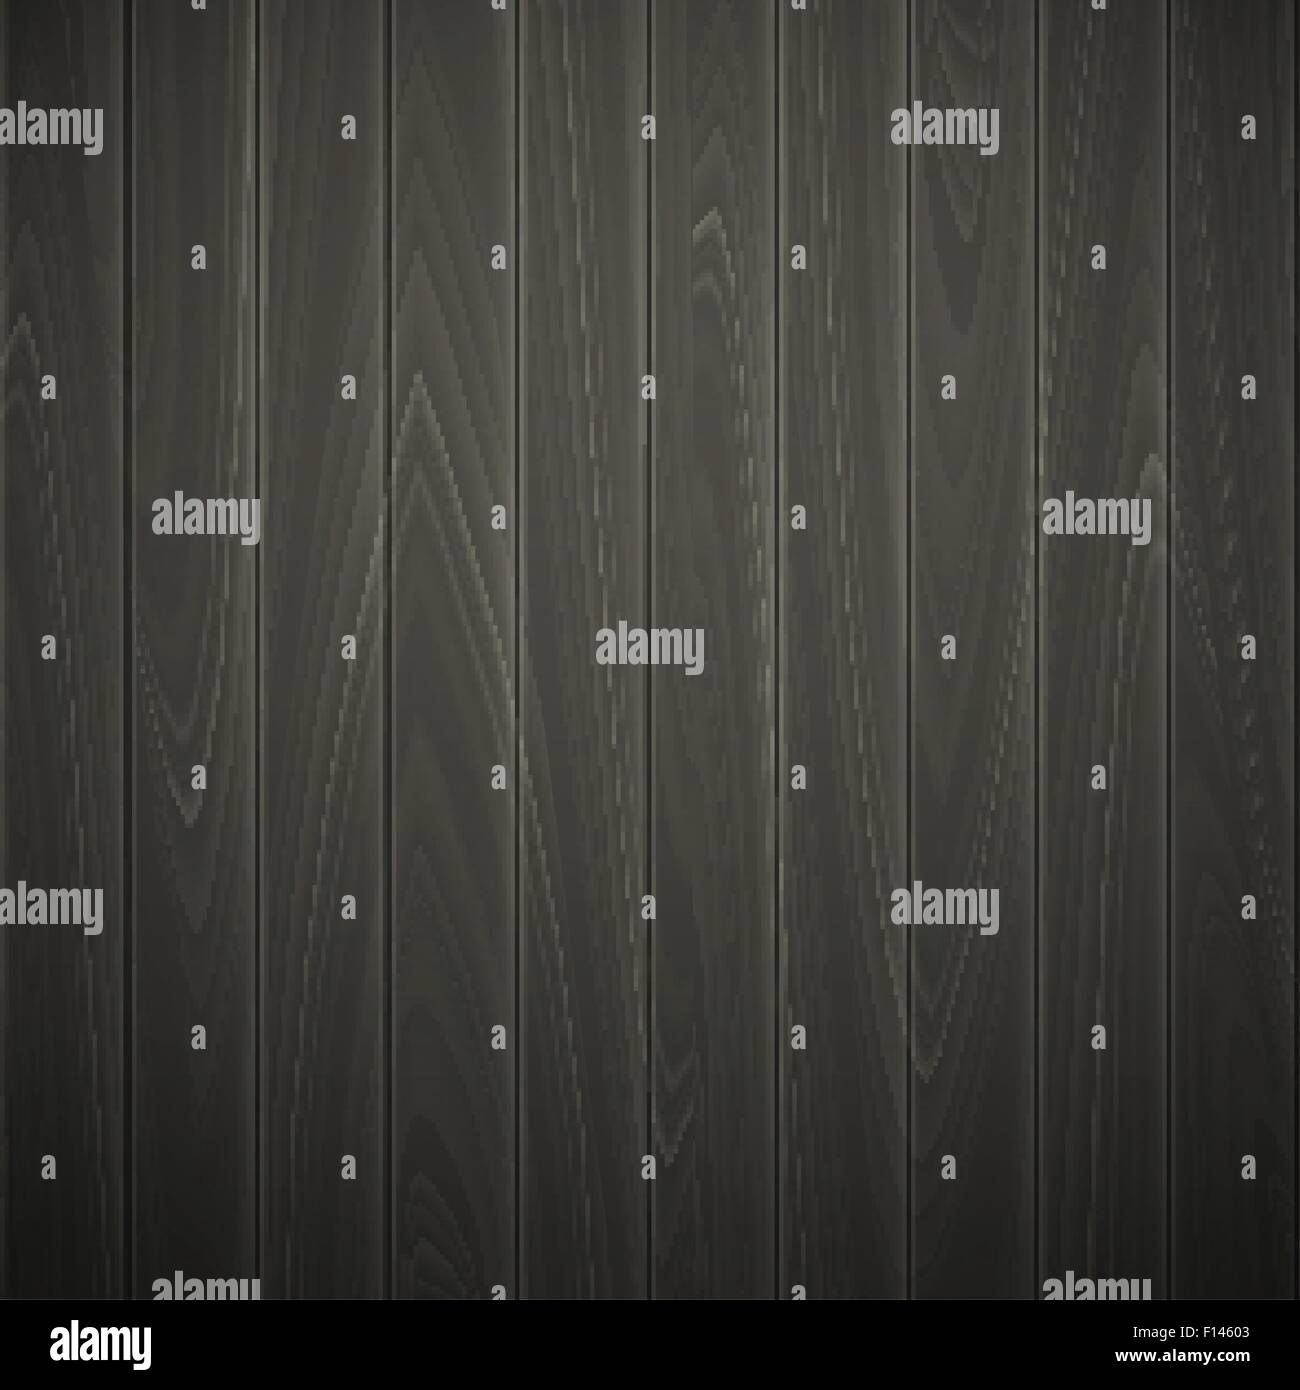 Wooden plank board background Stock Vector